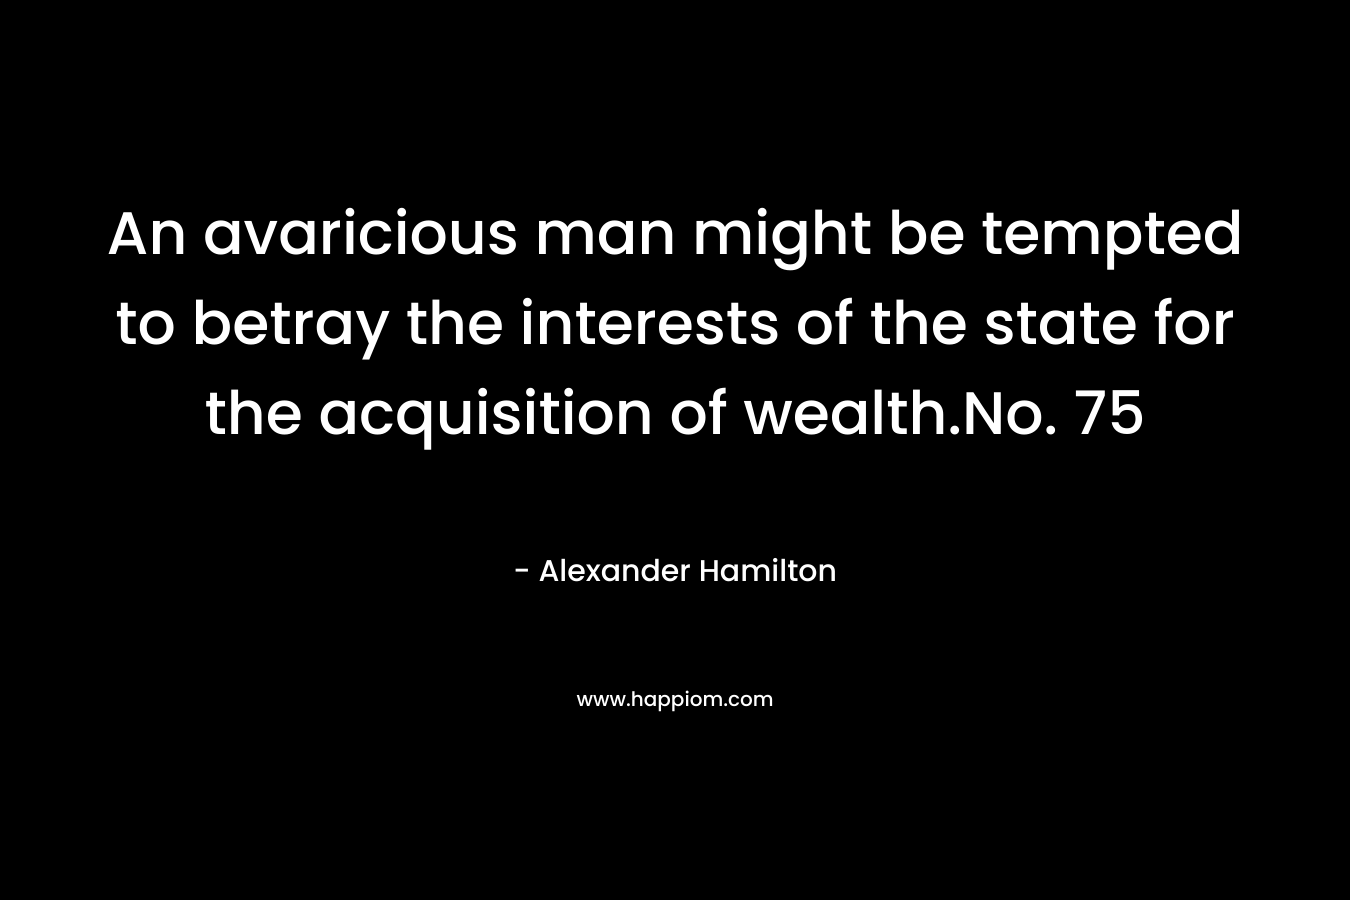 An avaricious man might be tempted to betray the interests of the state for the acquisition of wealth.No. 75